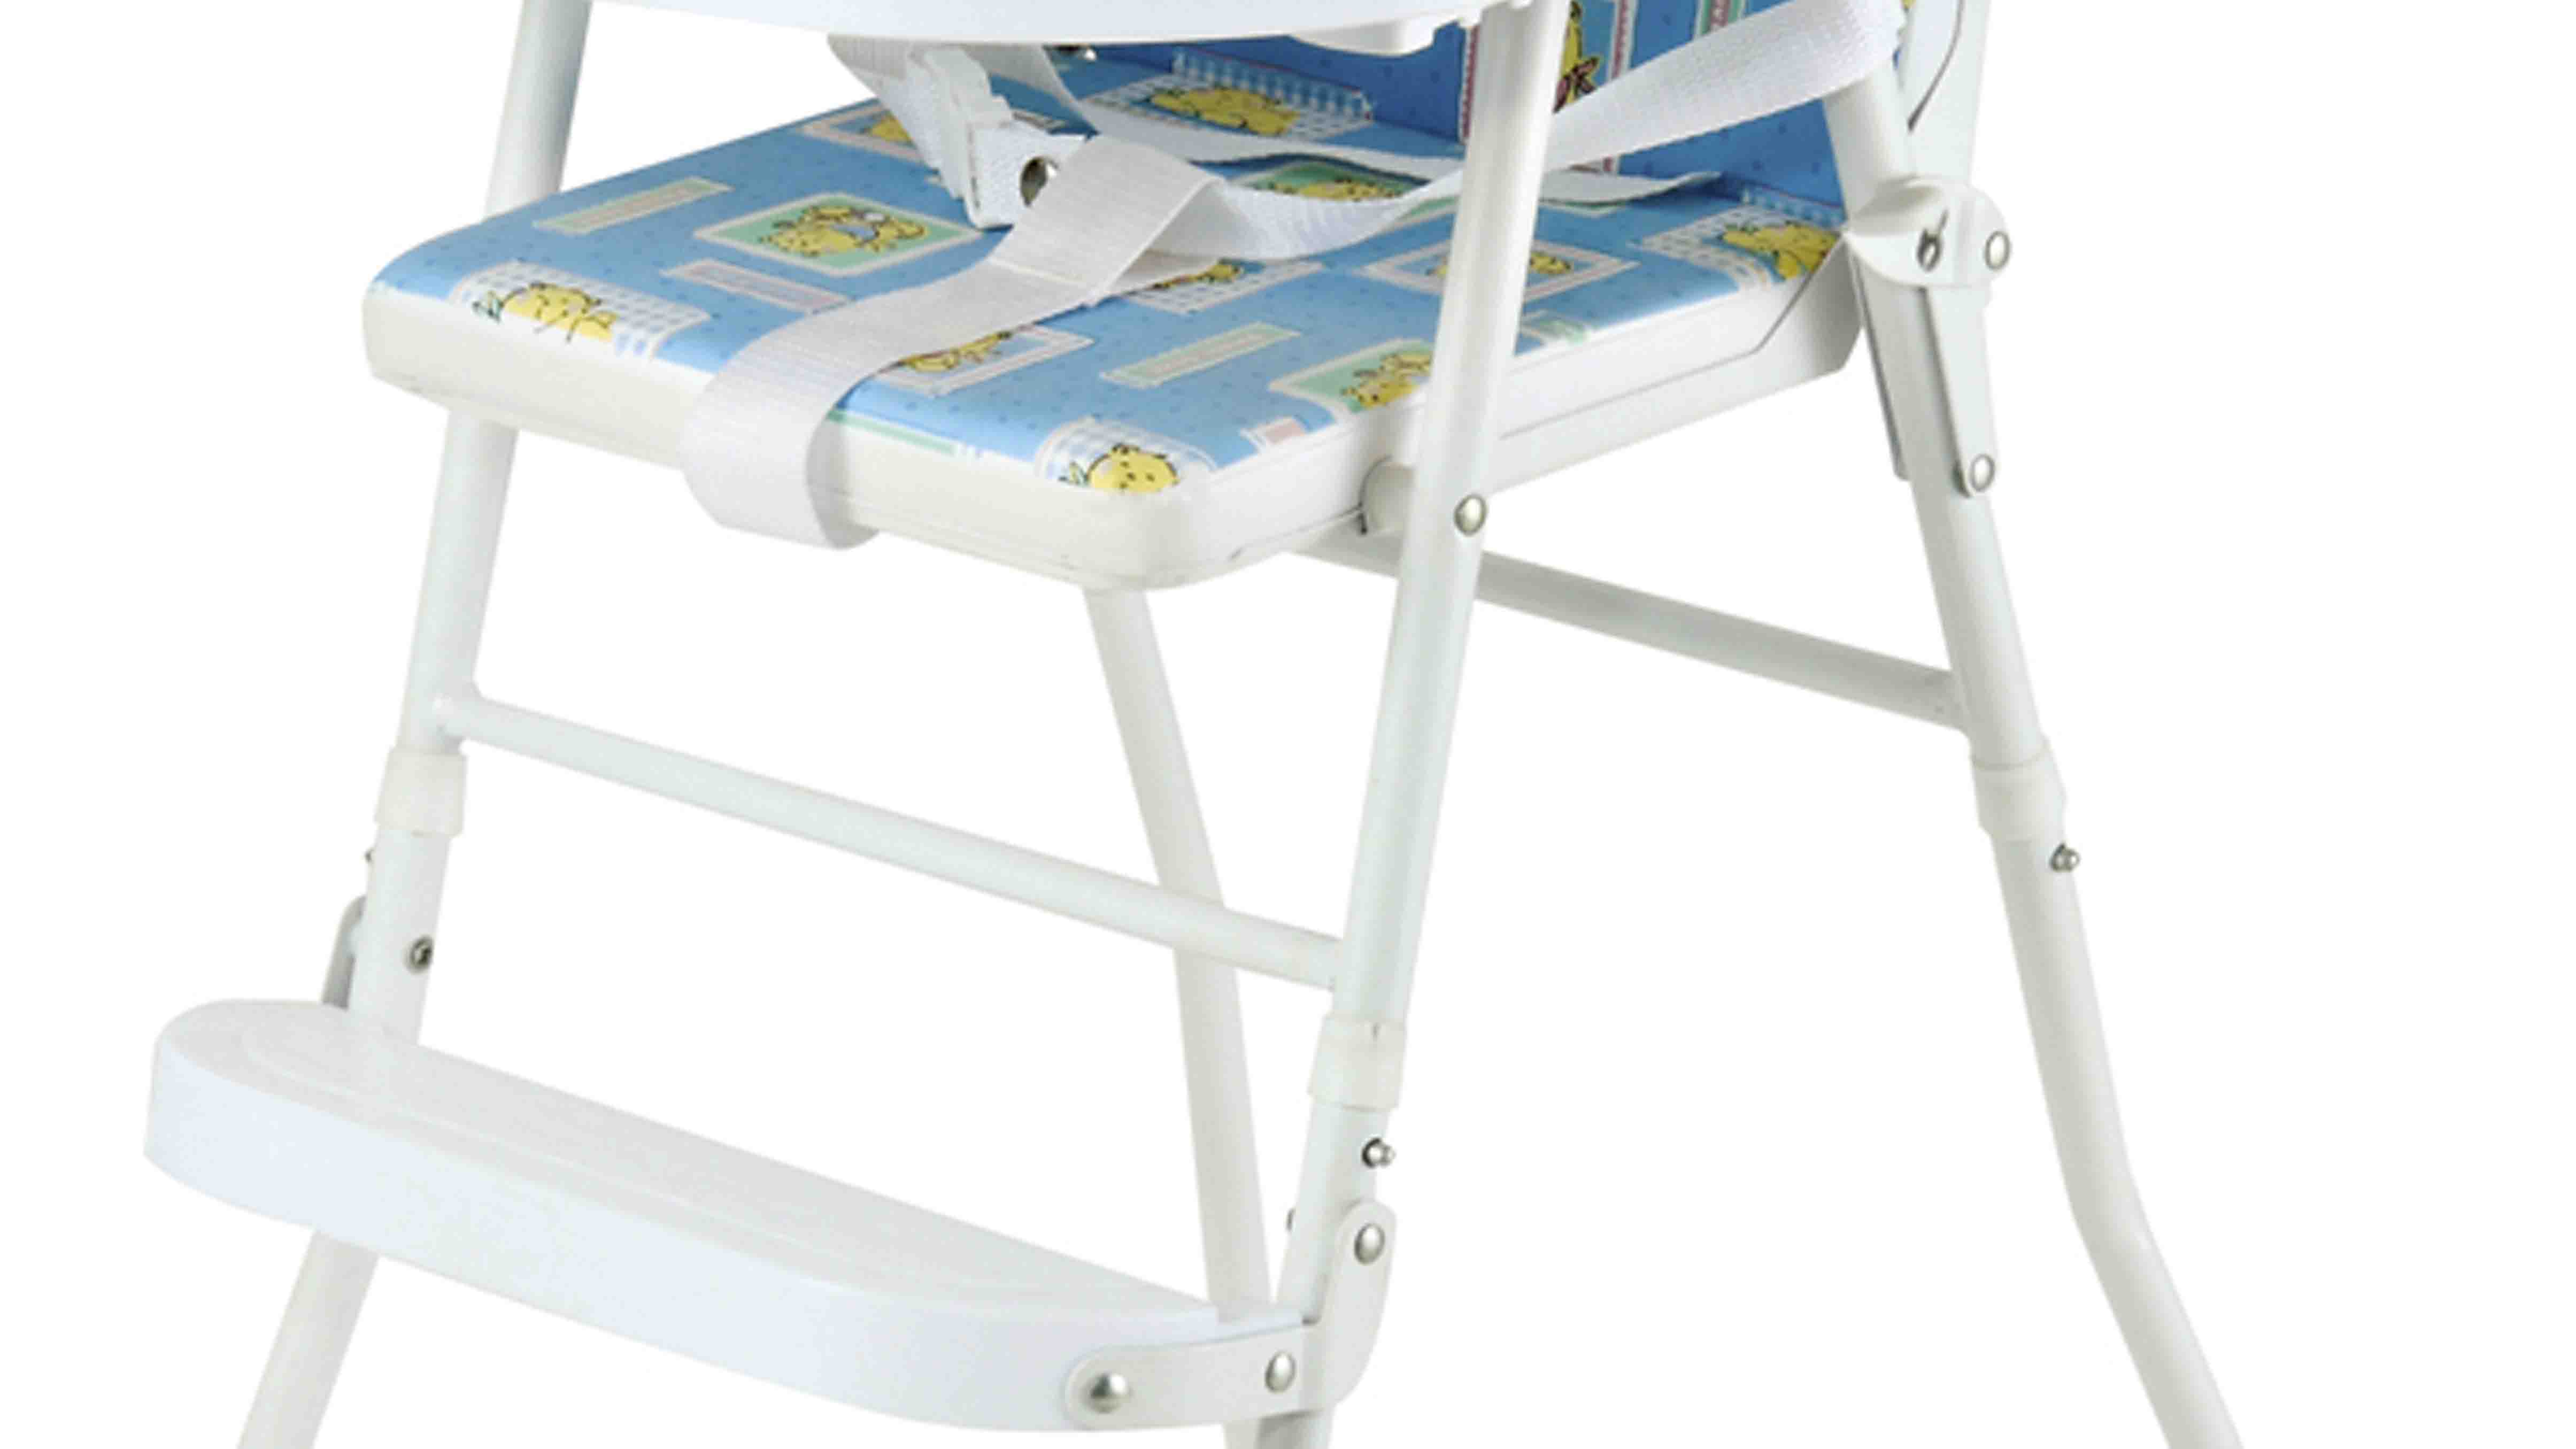 special baby high chair with wheels from China for livingroom